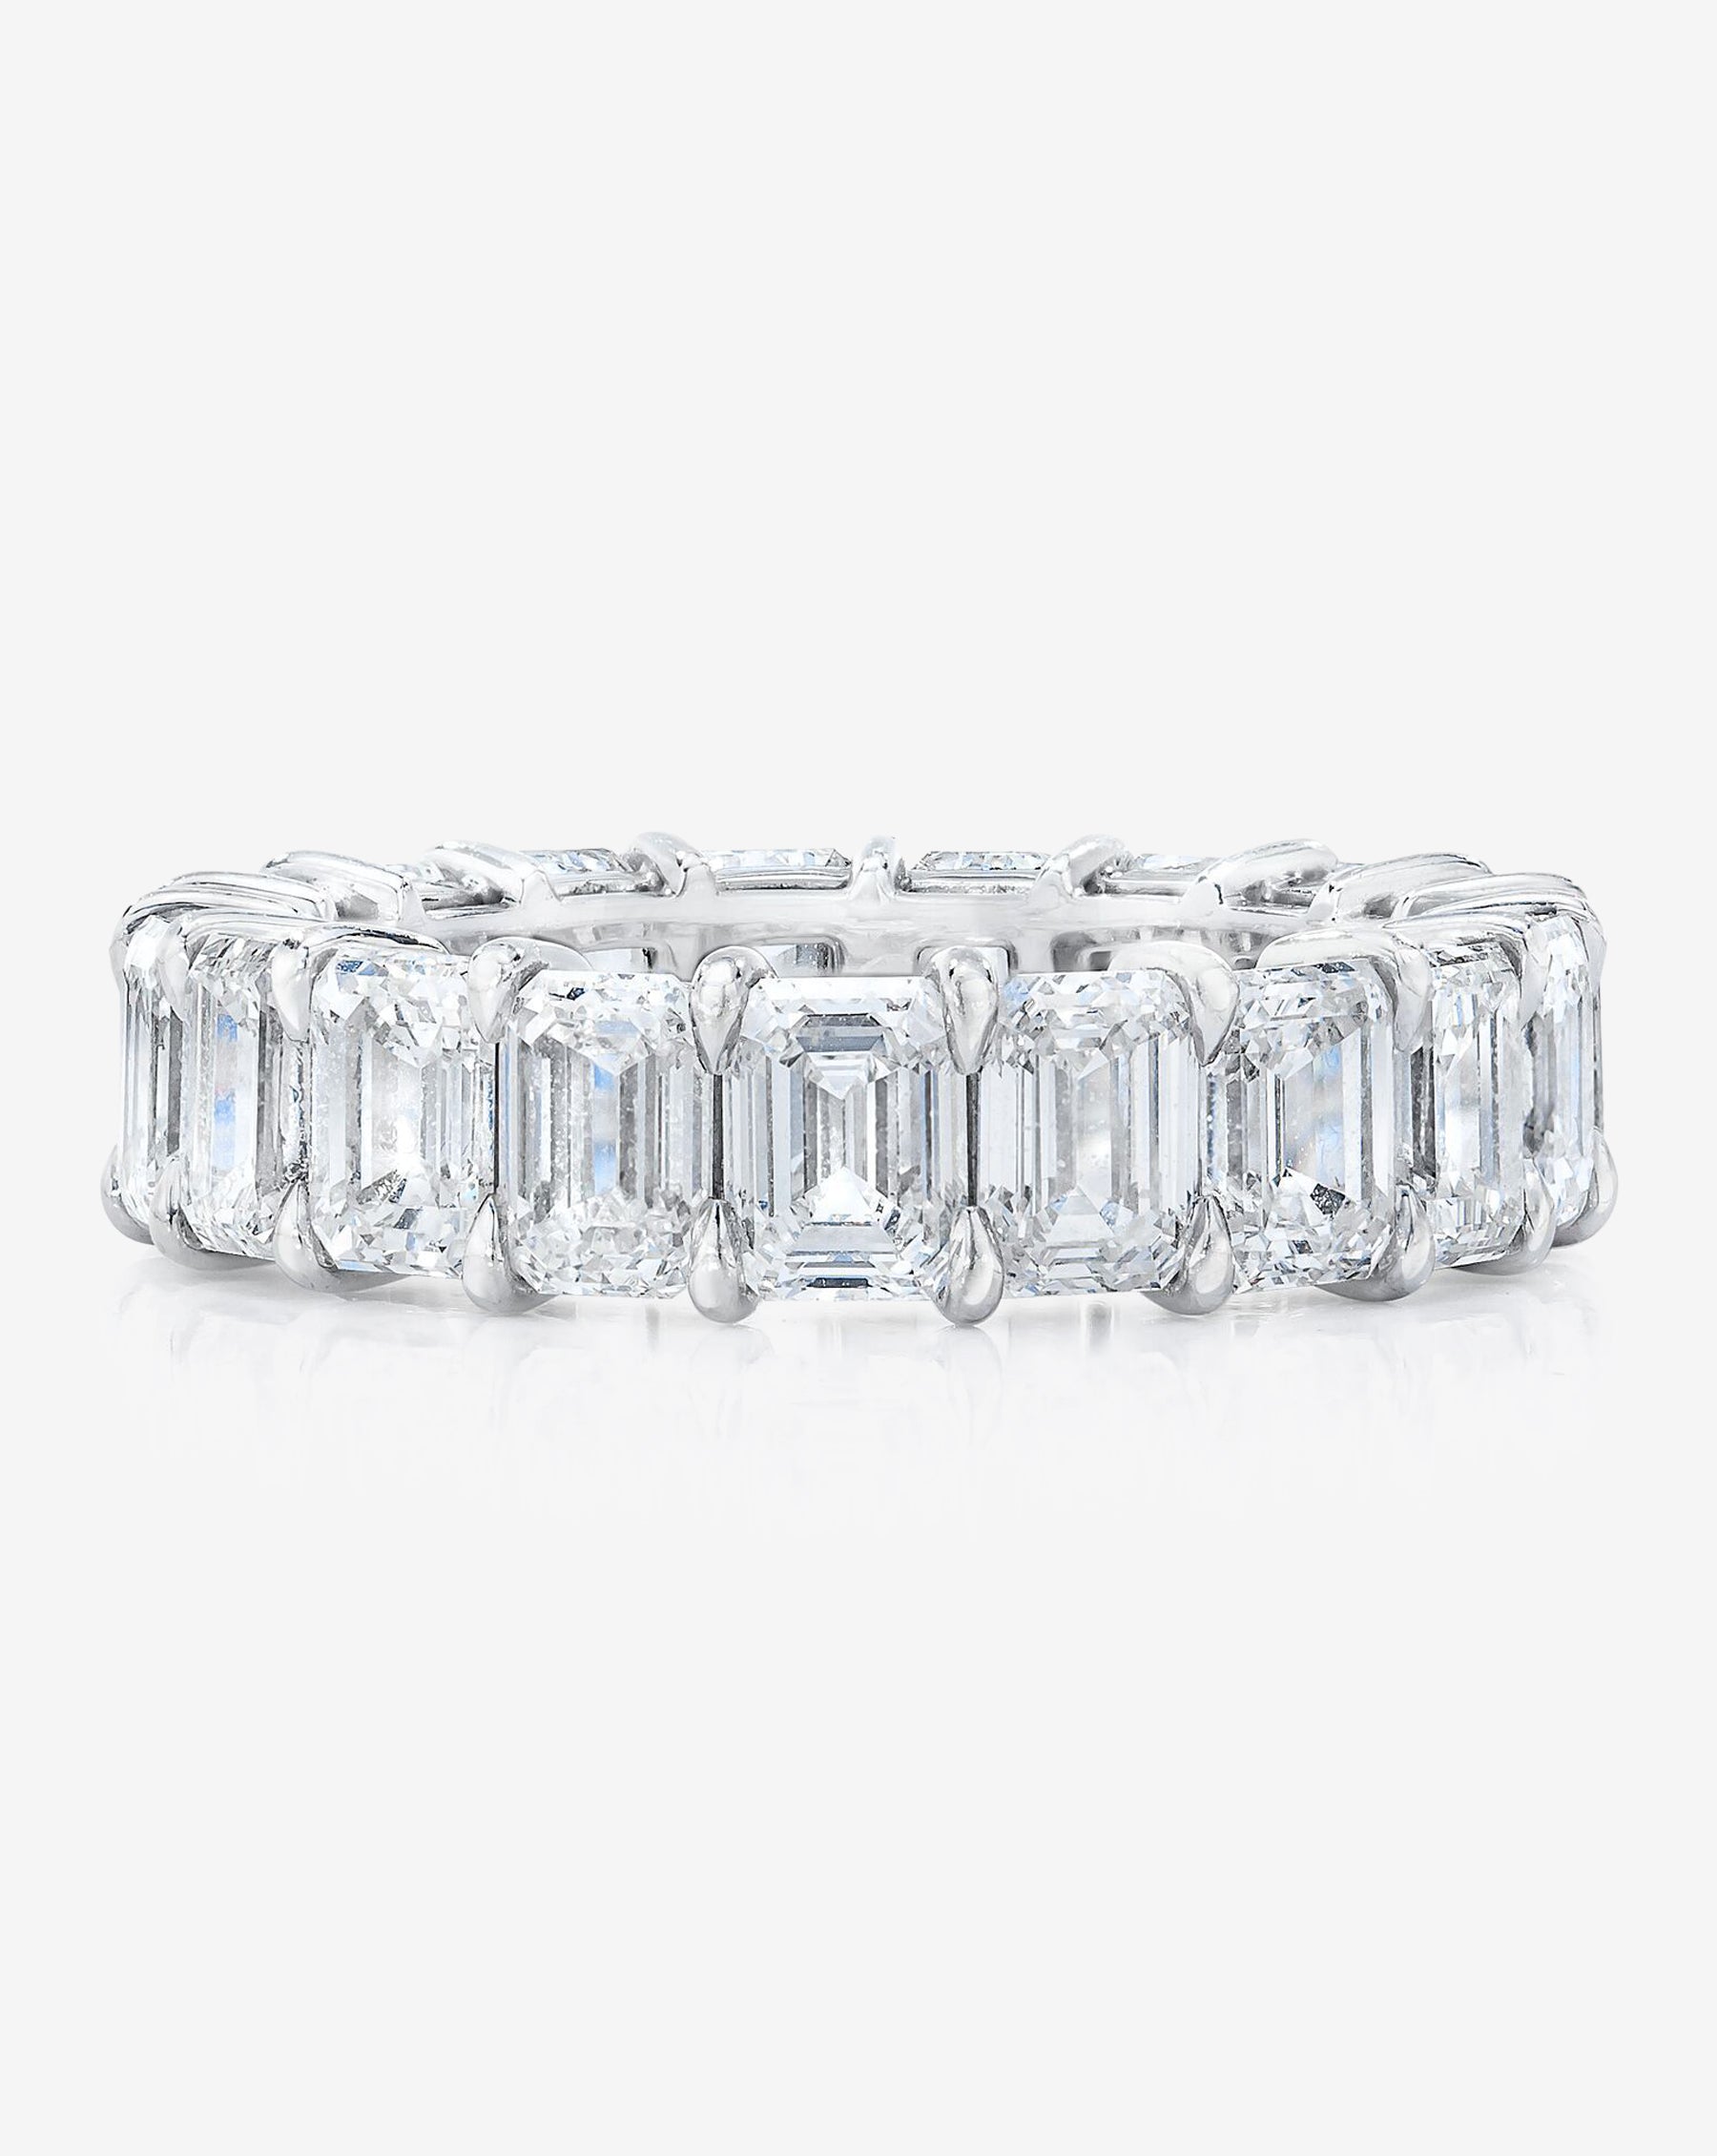 A Guide To Eternity Rings - A Popular Choice For A Wedding Ring